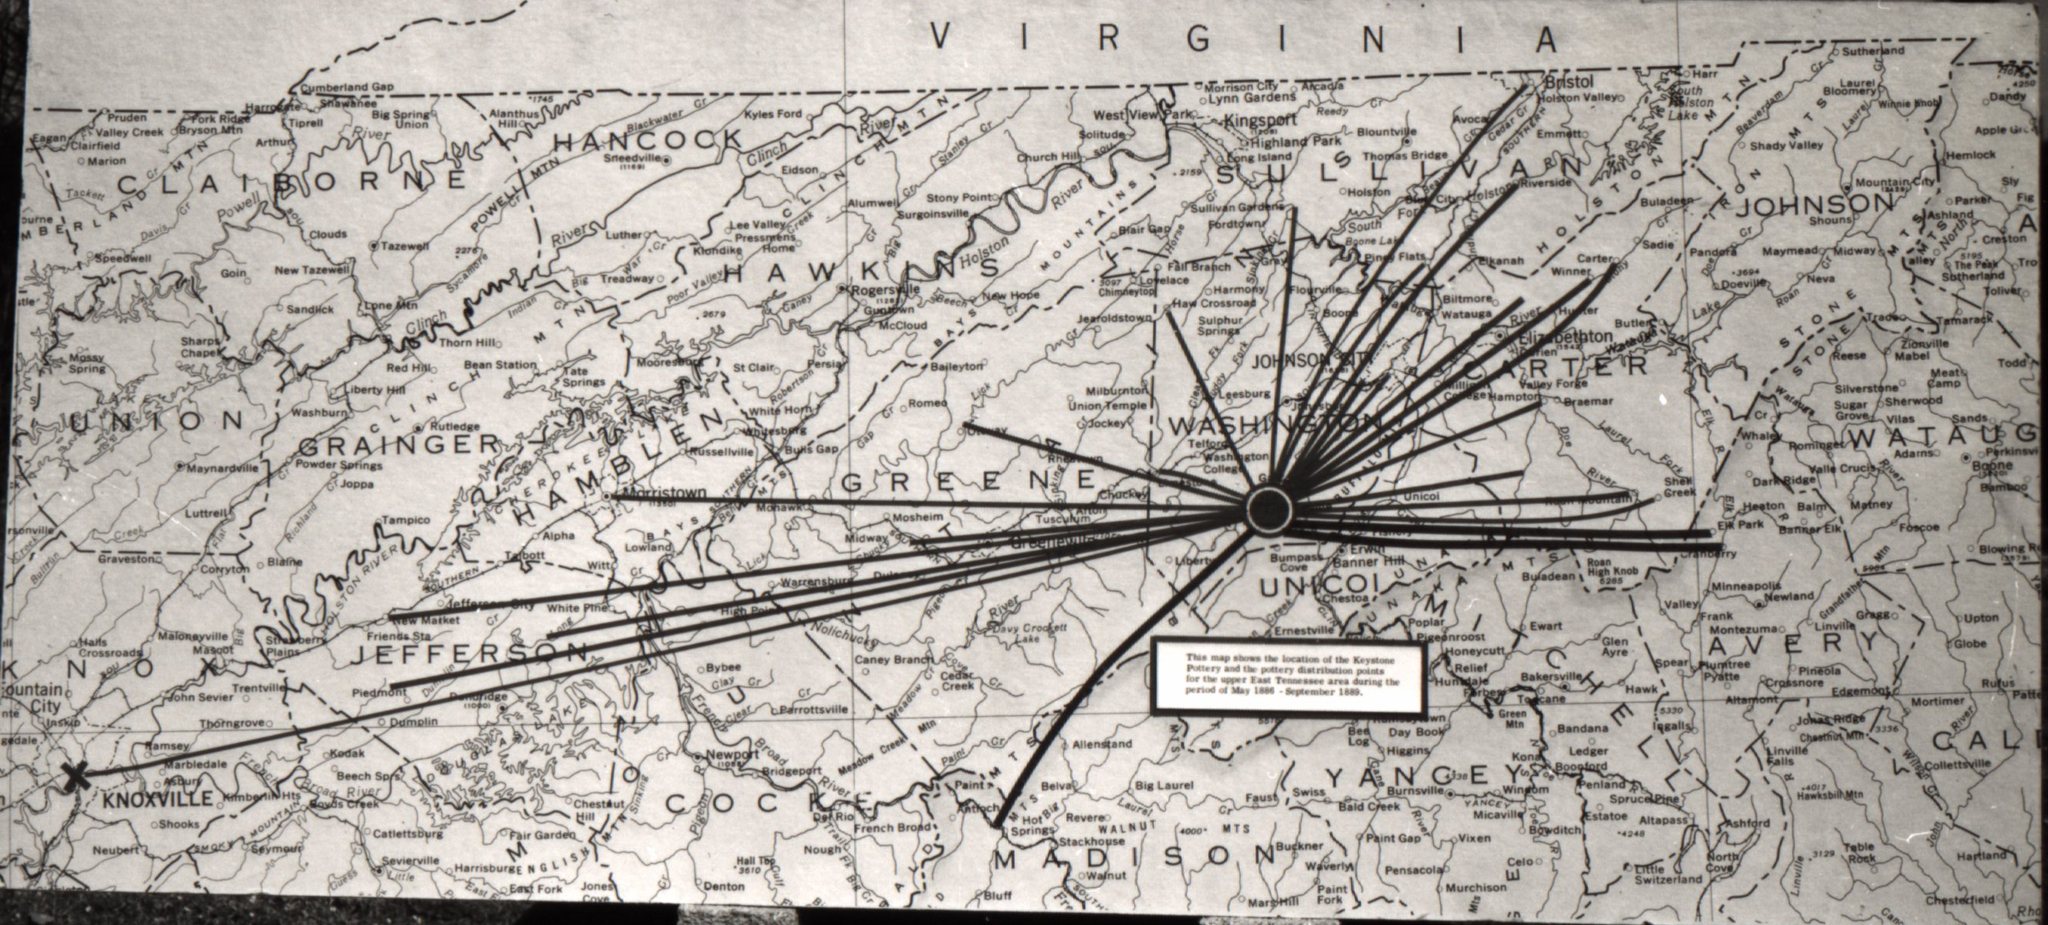 Marketing distribution map from an early exhibit. The caption reads: This map shows the location of the Keystone Pottery and the pottery distribution points for the upper Tennessee area during the period of May 1886 â€“ September 1889. Burbage18.